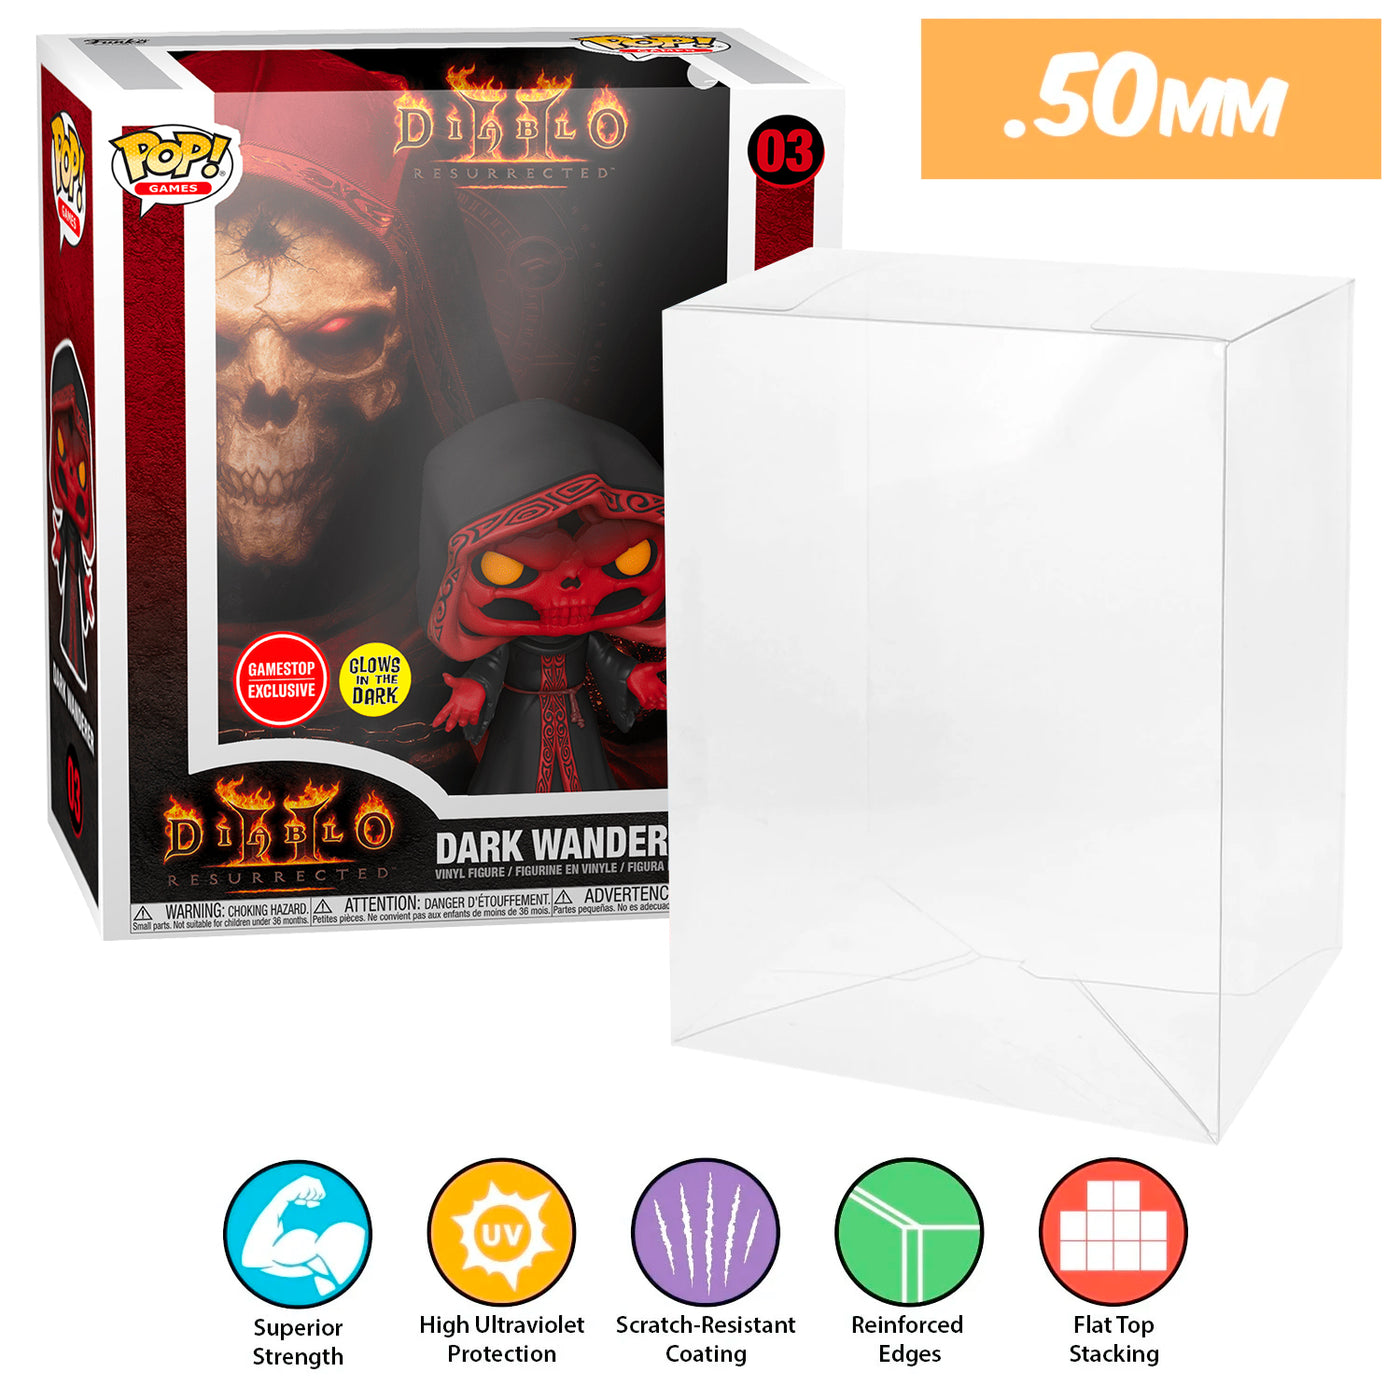 03 diablo dark wanderer pop game covers best funko pop protectors thick strong uv scratch flat top stack vinyl display geek plastic shield vaulted eco armor fits collect protect display case kollector protector